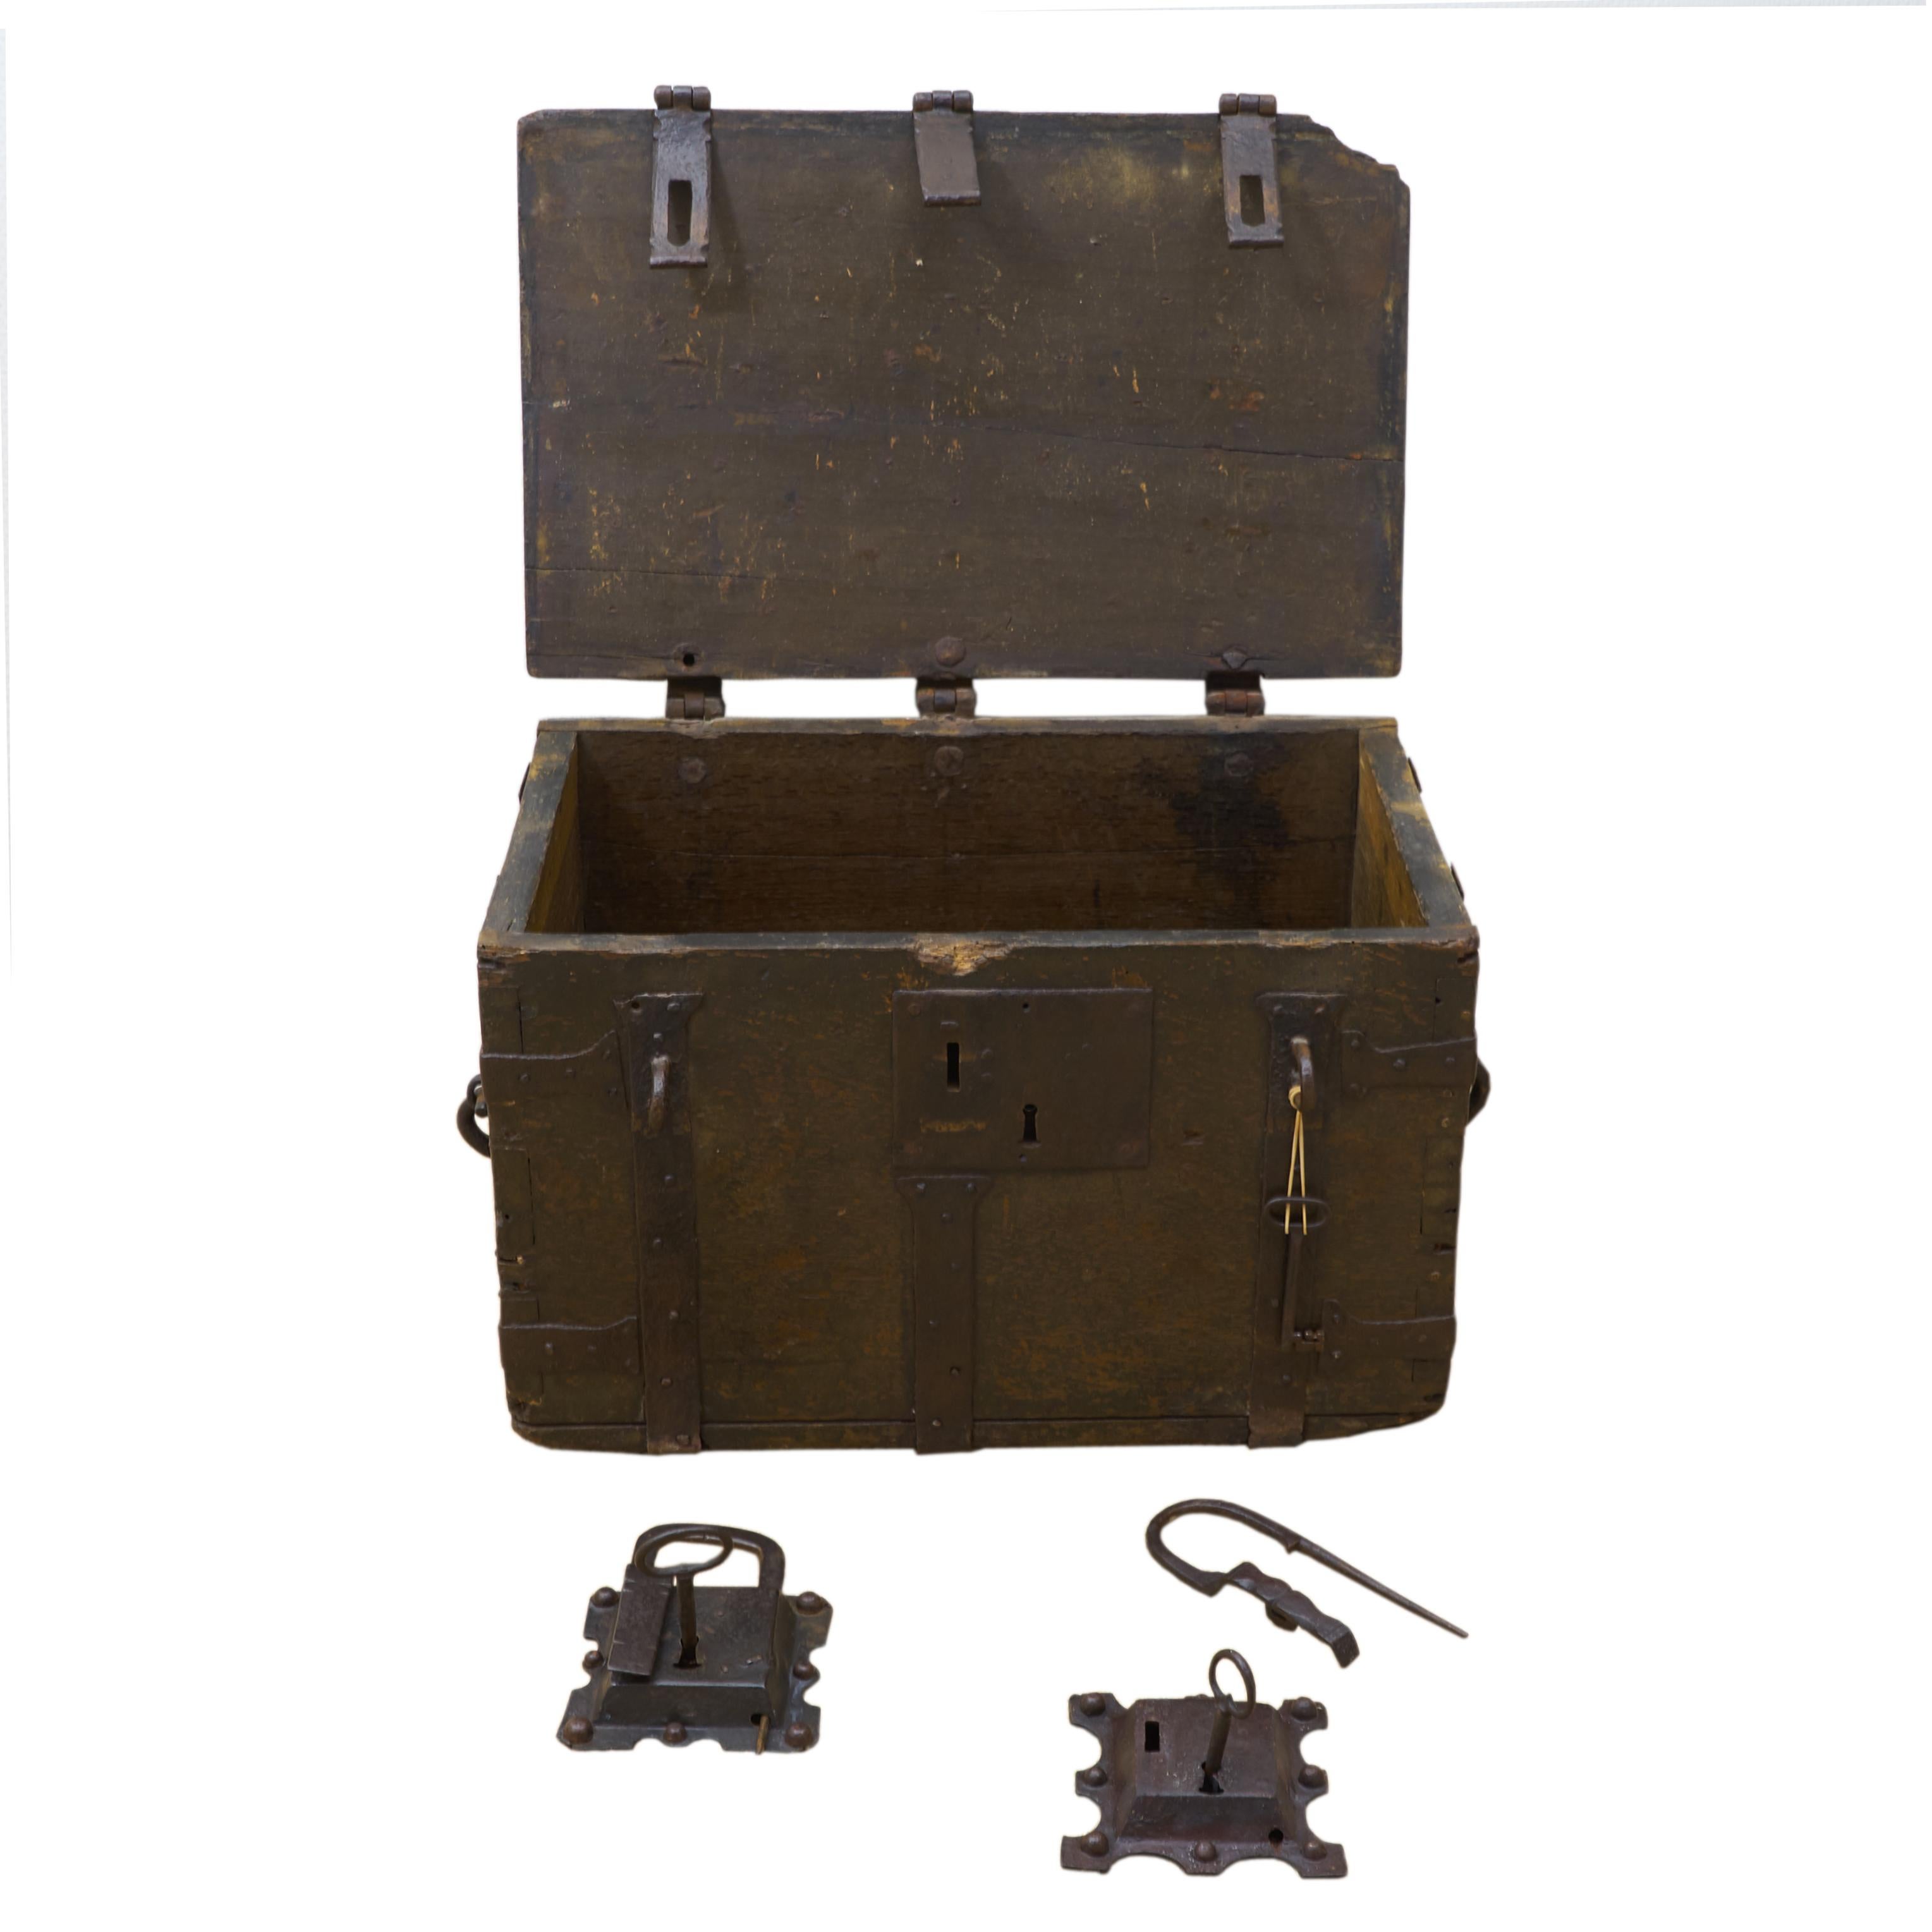 A Dutch mid-16th century oak chest with iron straps, small rests of polychrome painting.
The chest has three locks. One in the front and two original 16th century Dutch iron padlocks. The chest is very attractive because of its simplicity and